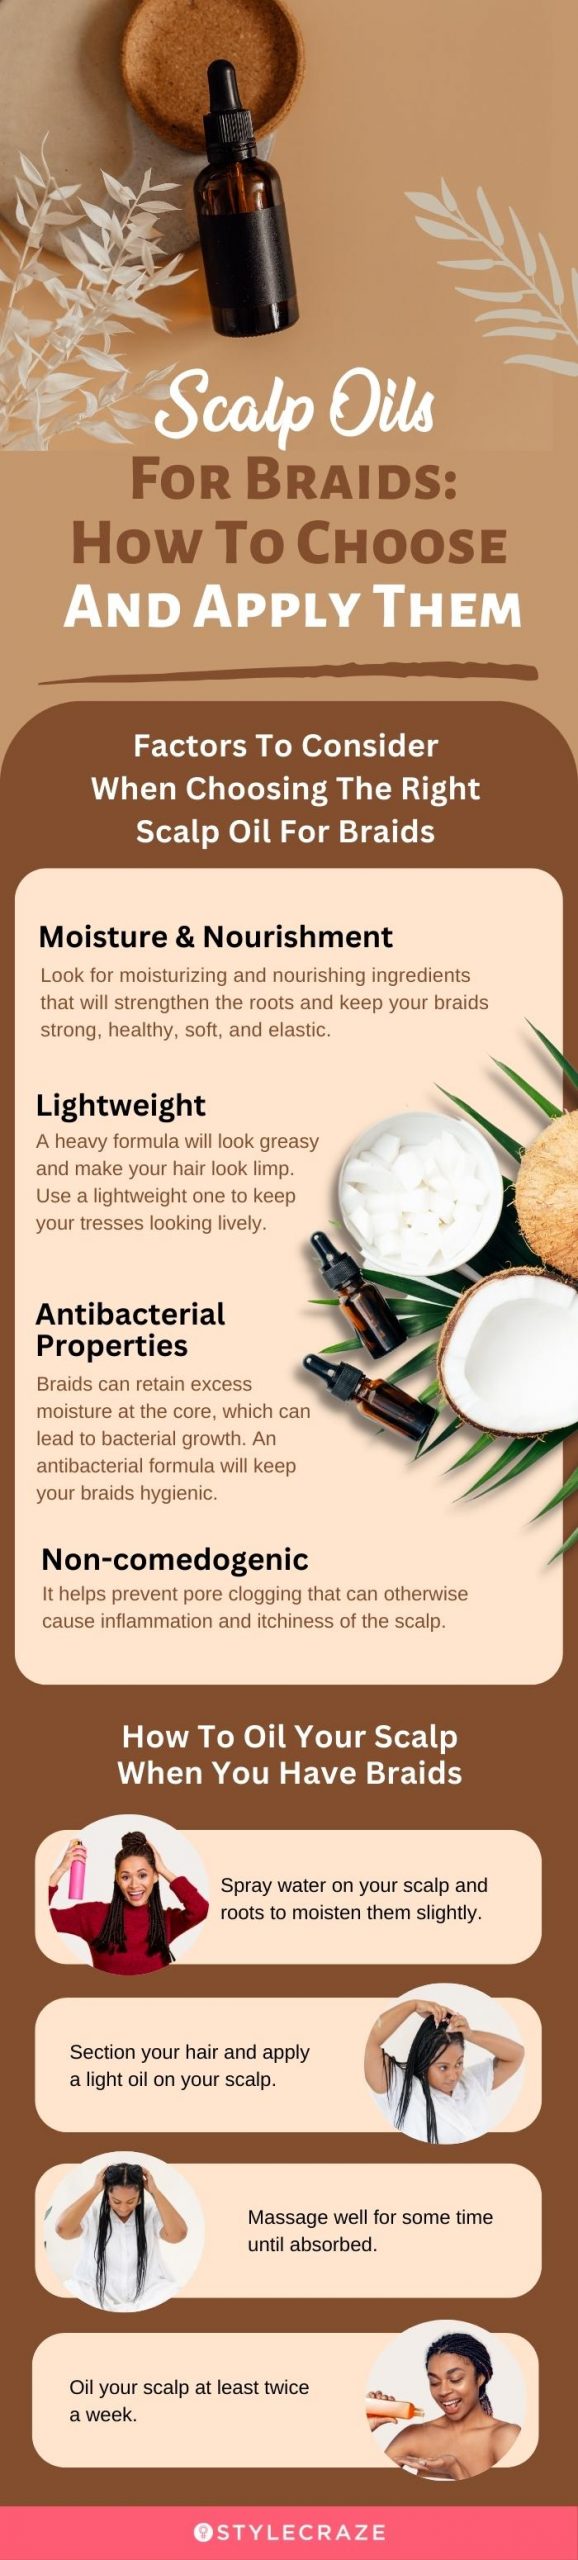 Scalp Oils For Braids: How To Choose And Apply Them (infographic)